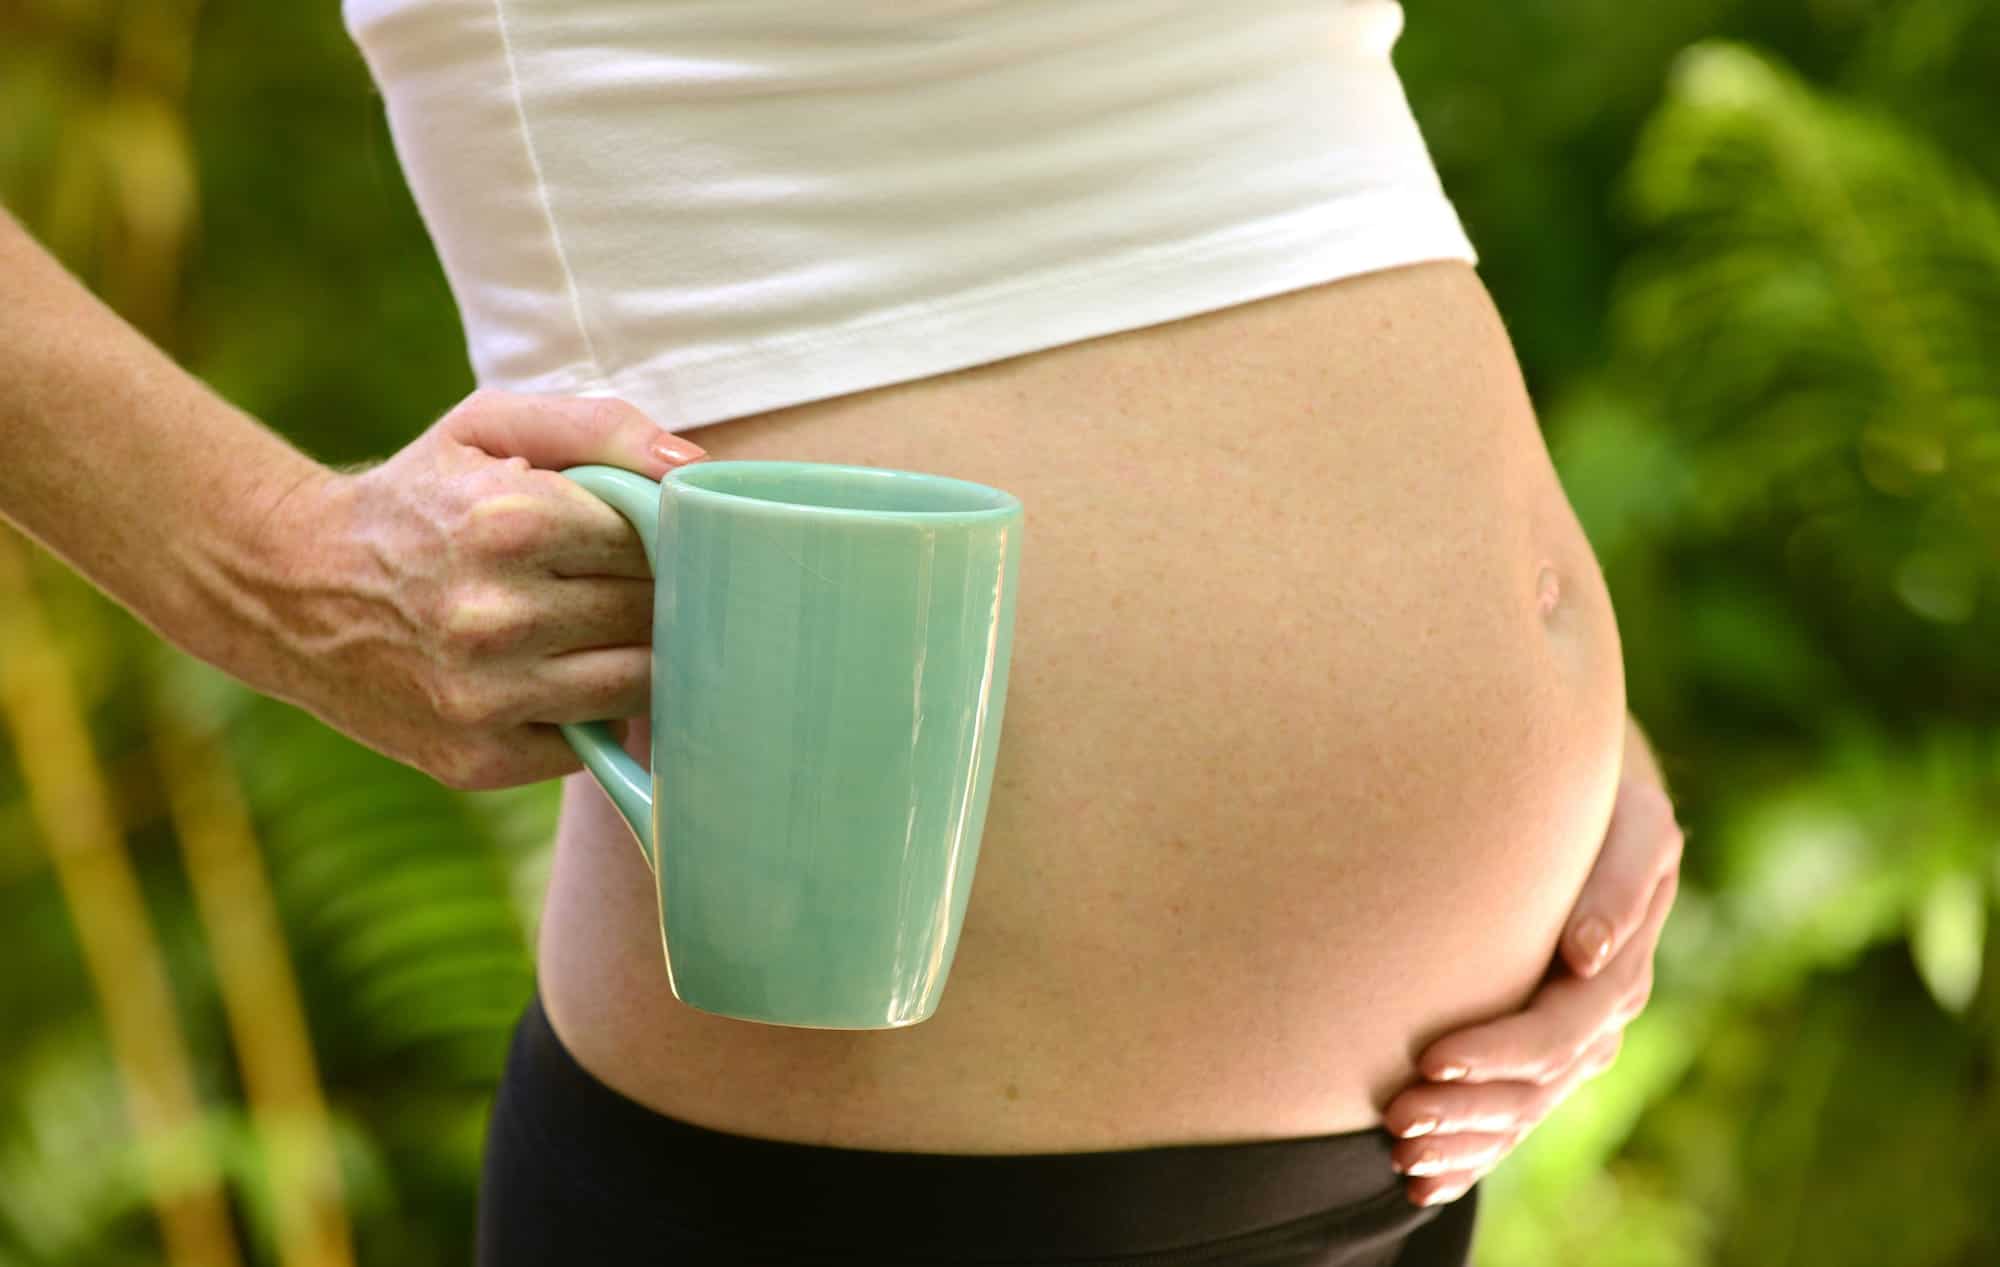 Can I Drink Decaf Coffee While Pregnant?